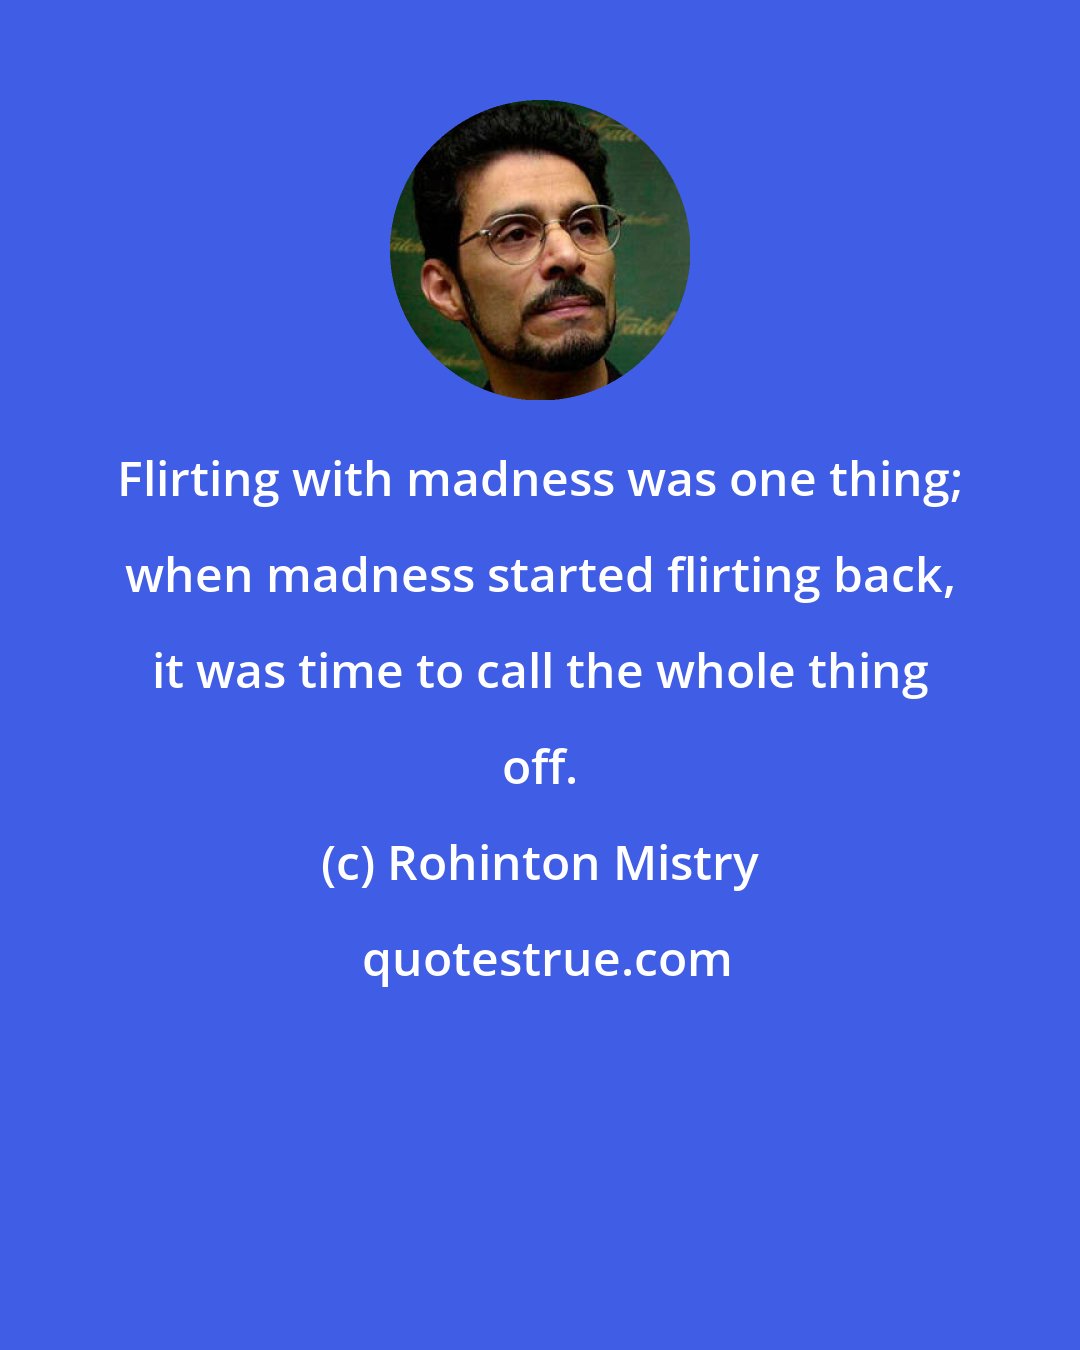 Rohinton Mistry: Flirting with madness was one thing; when madness started flirting back, it was time to call the whole thing off.